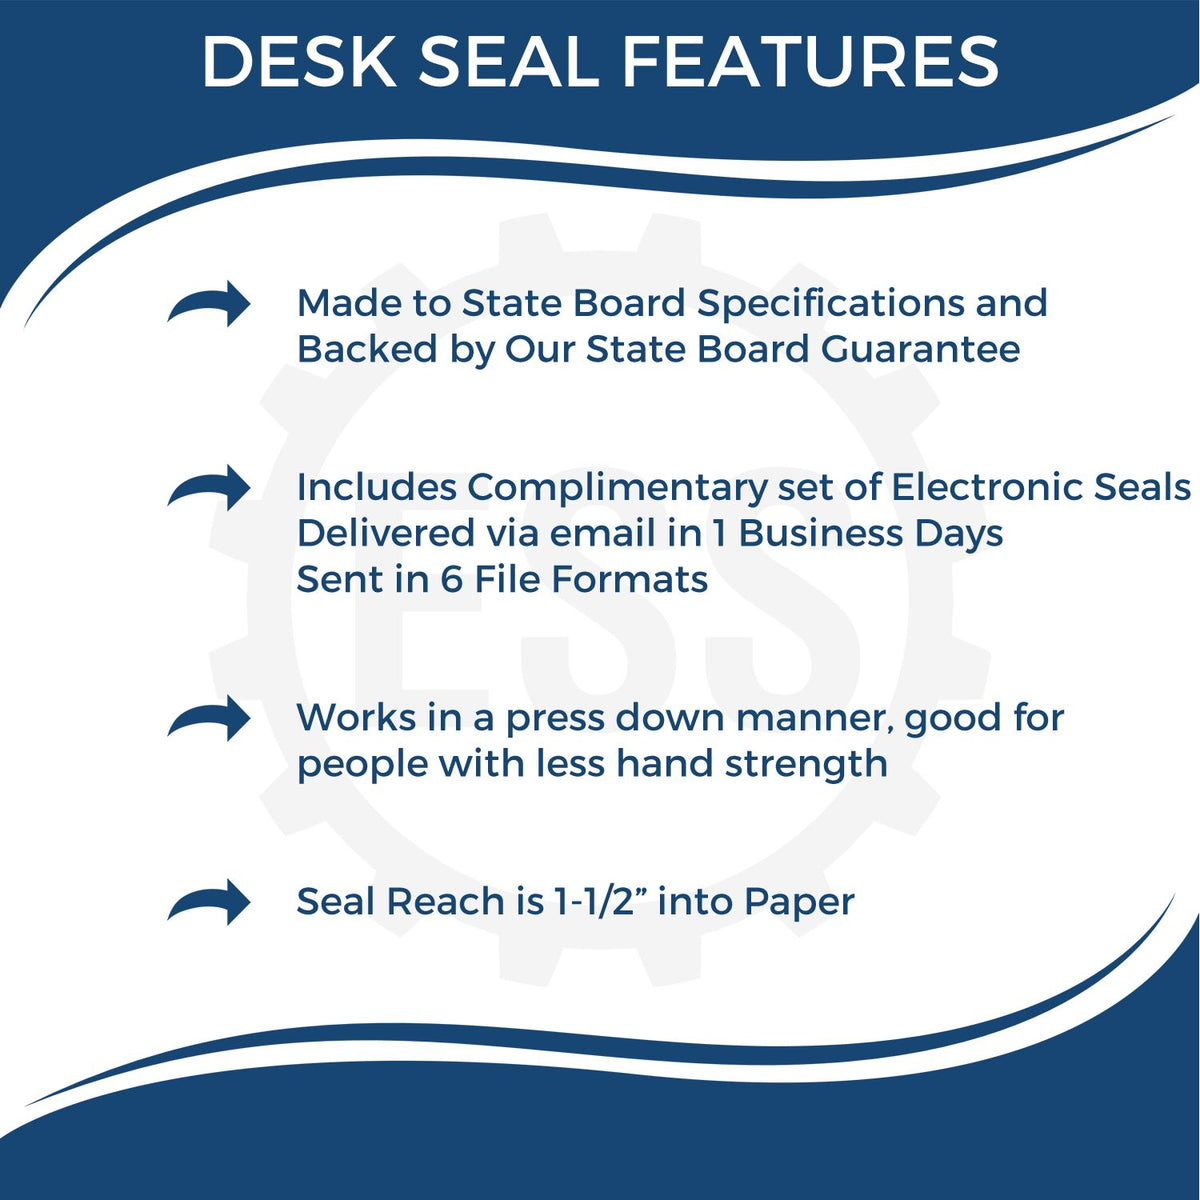 A picture of an infographic highlighting the selling points for the Alabama Engineer Desk Seal